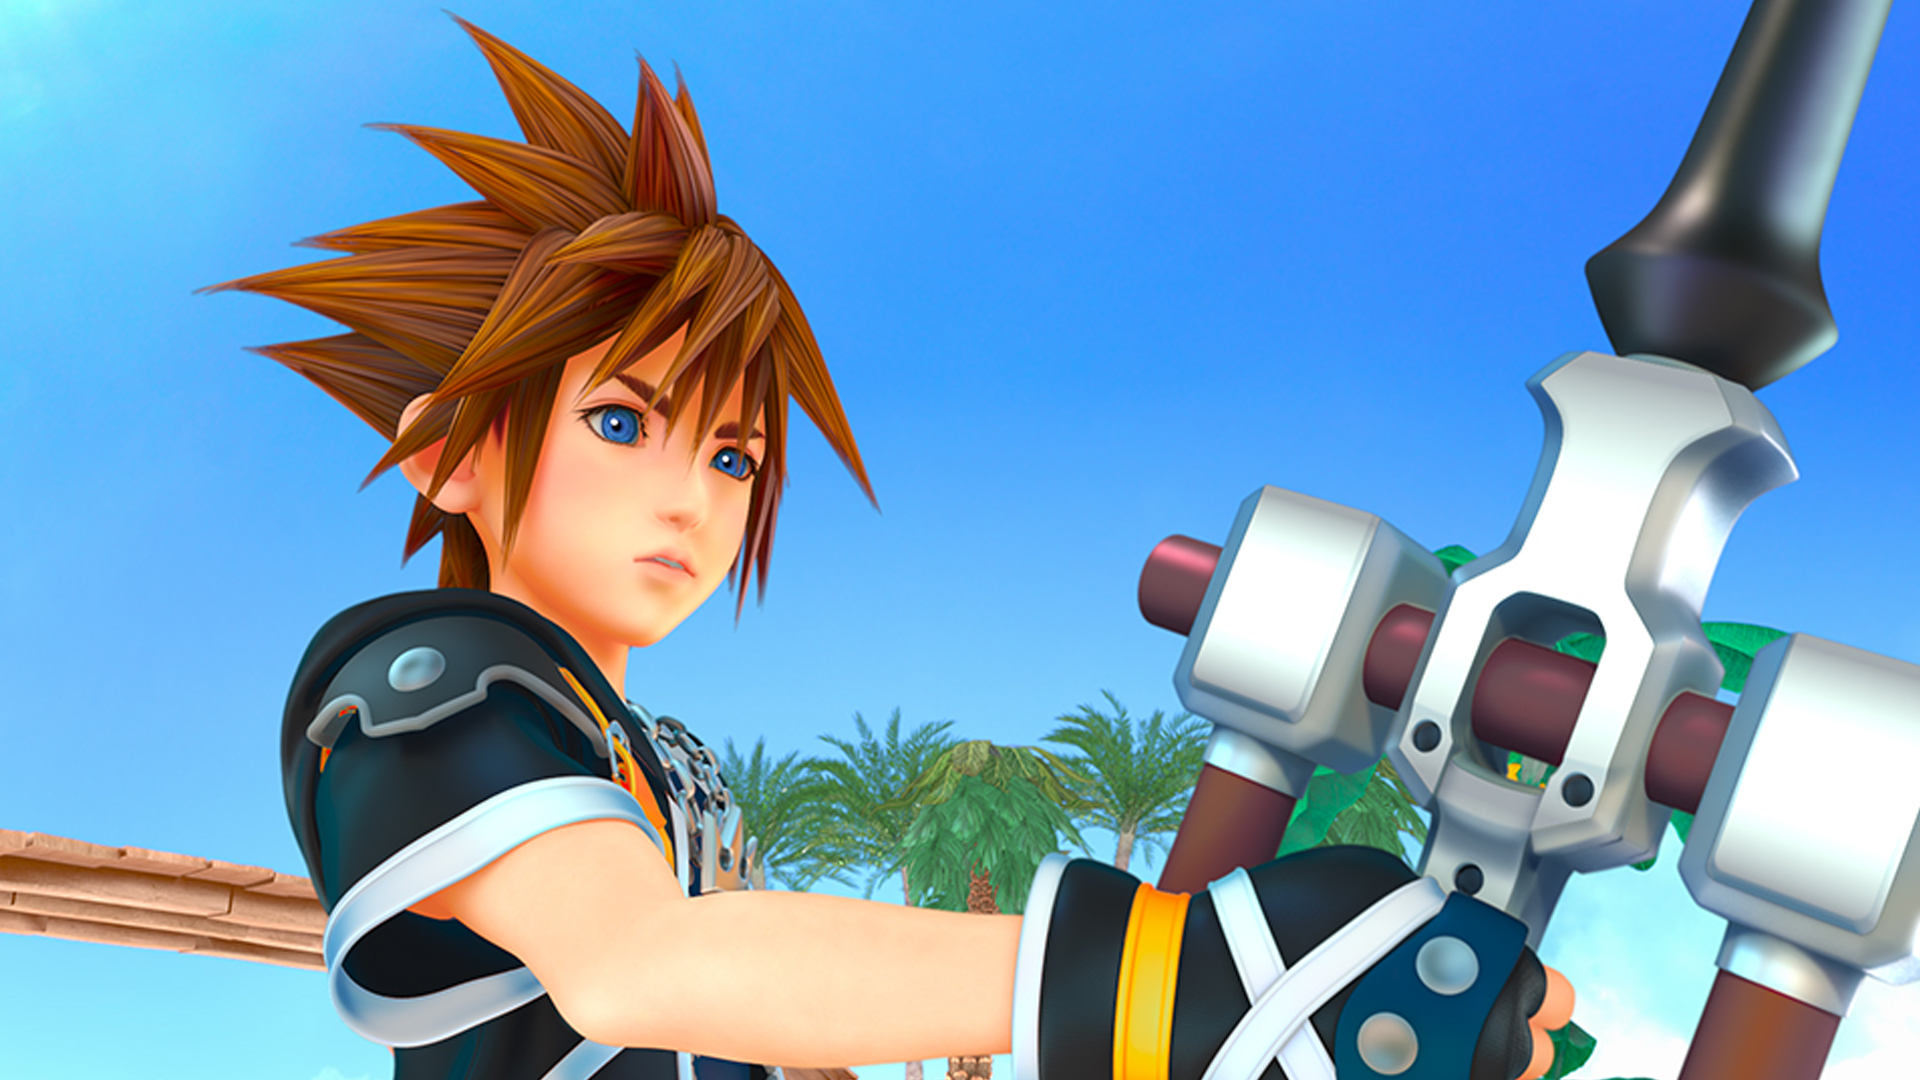 Best Kingdom Hearts 3 keyblades - all the keyblades ranked from worst to  best